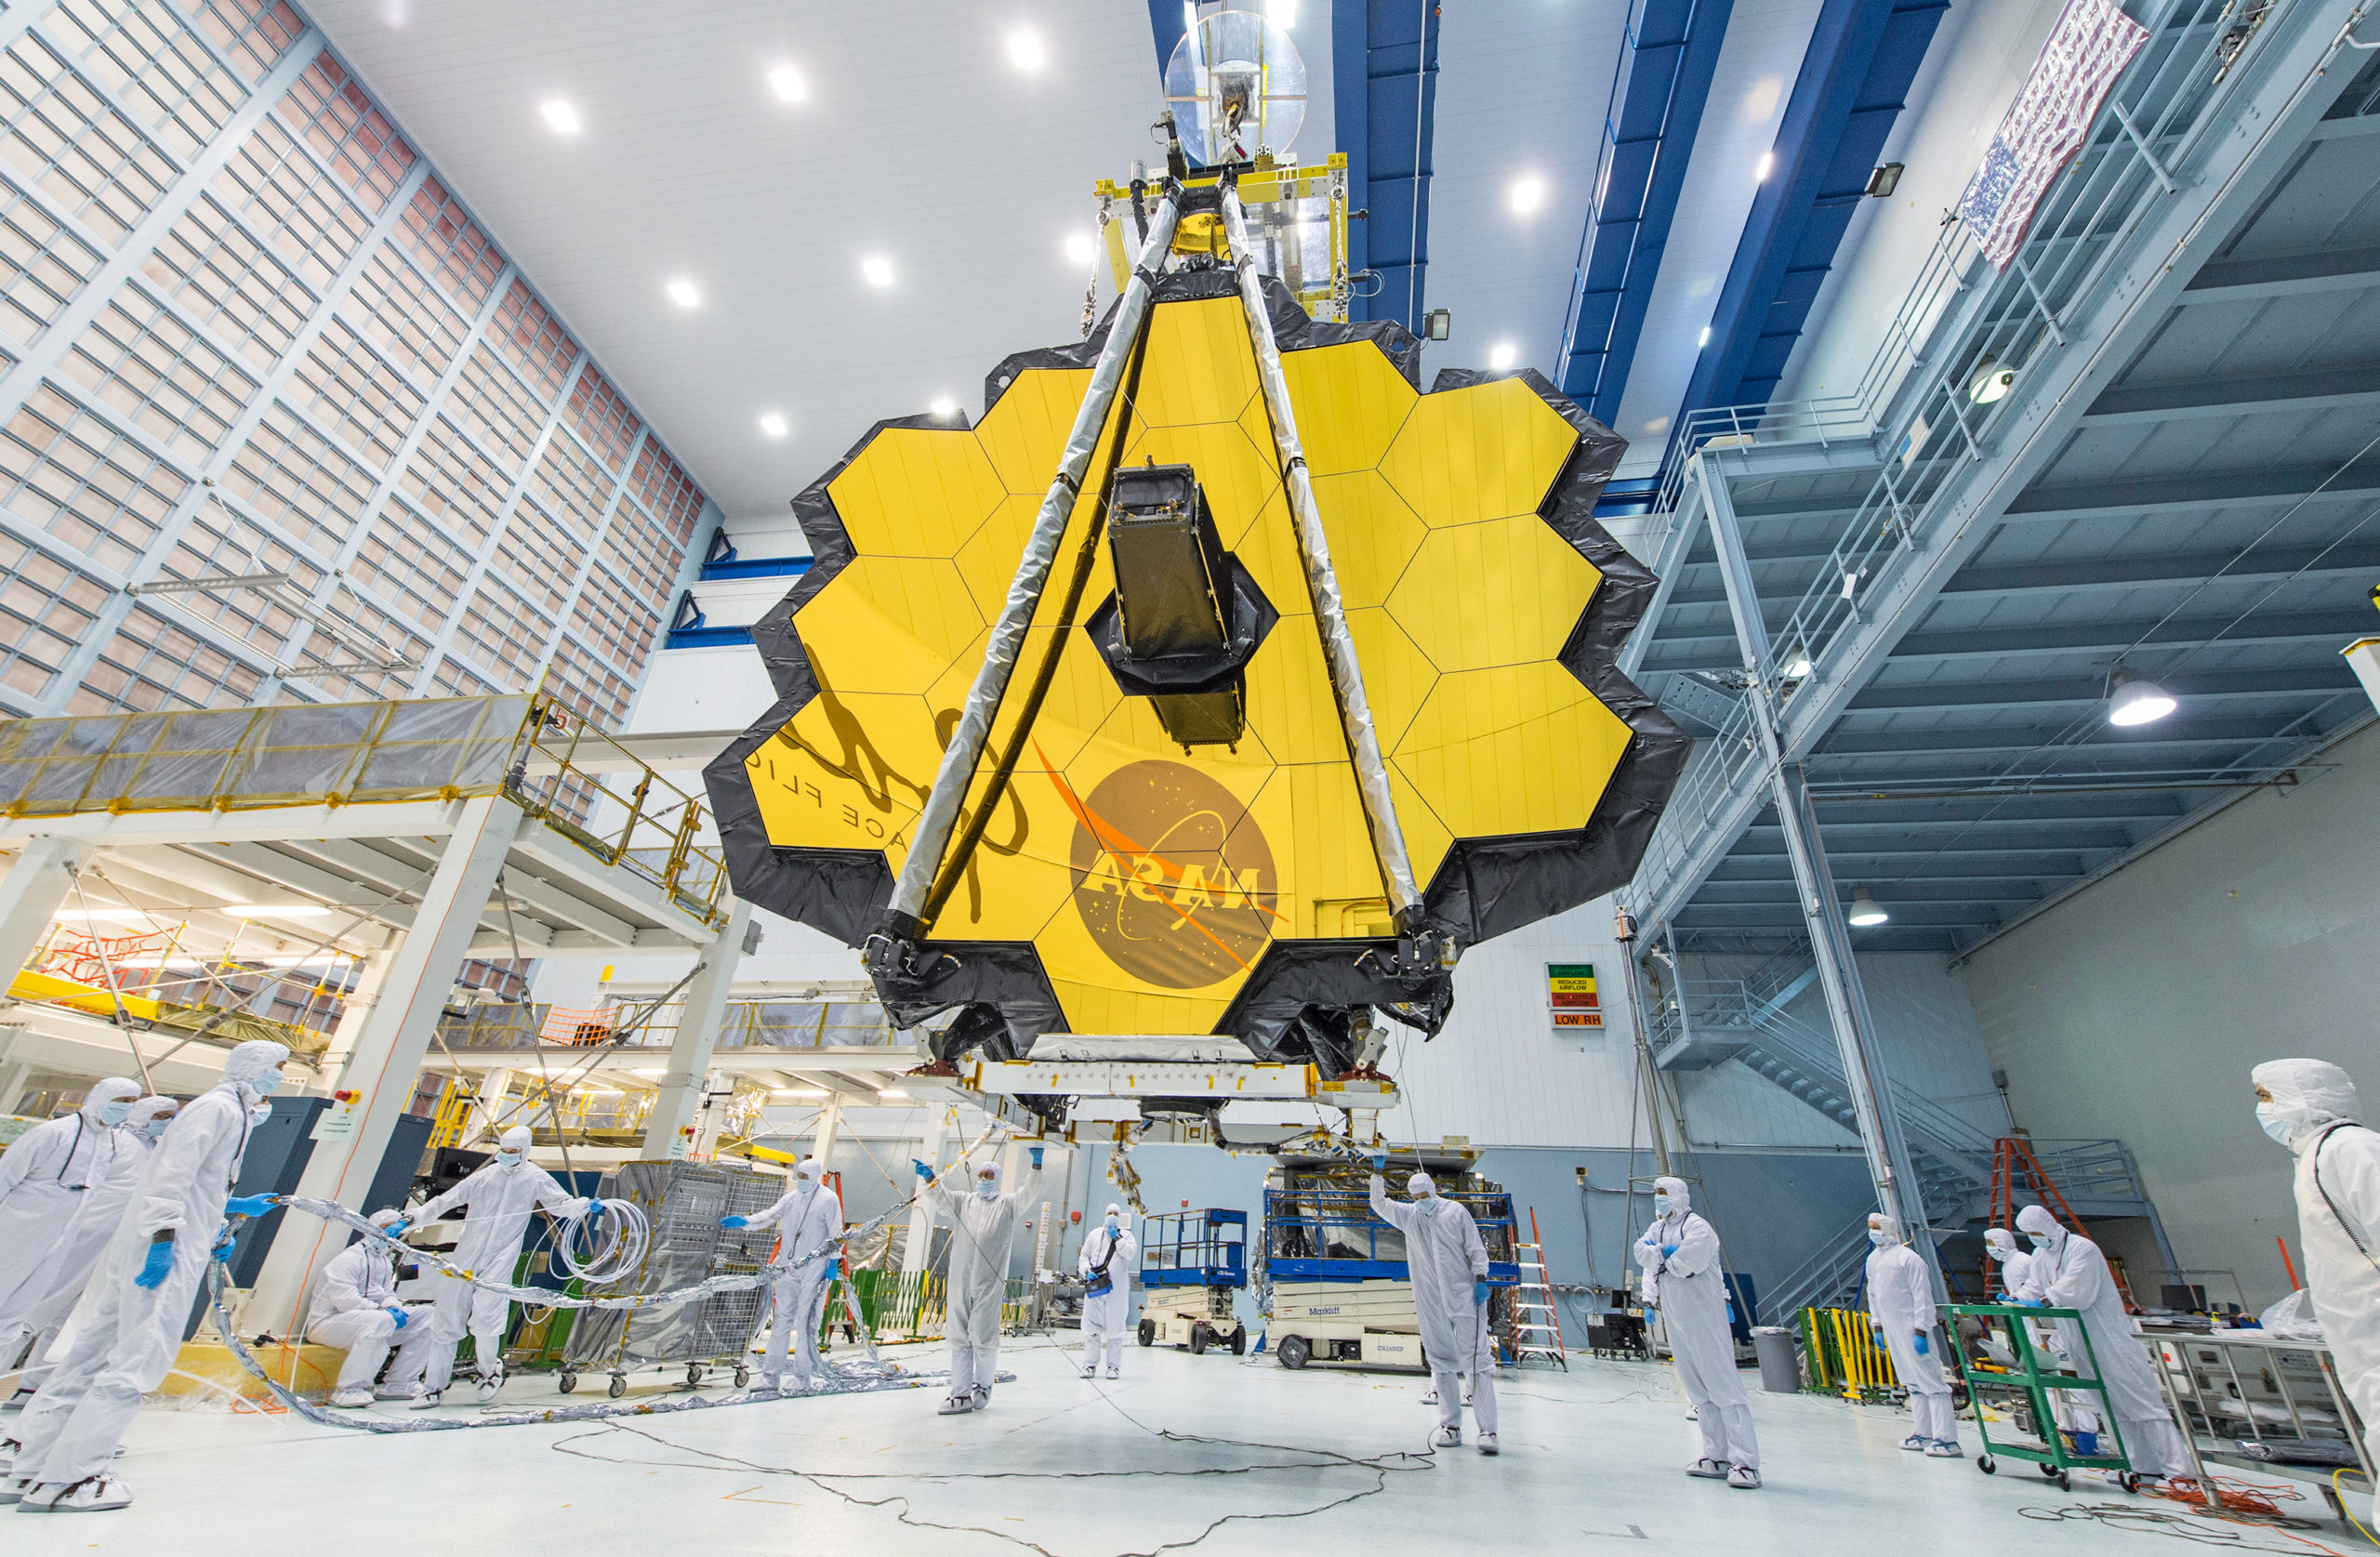 James Webb Space Telescope being tested on Earth